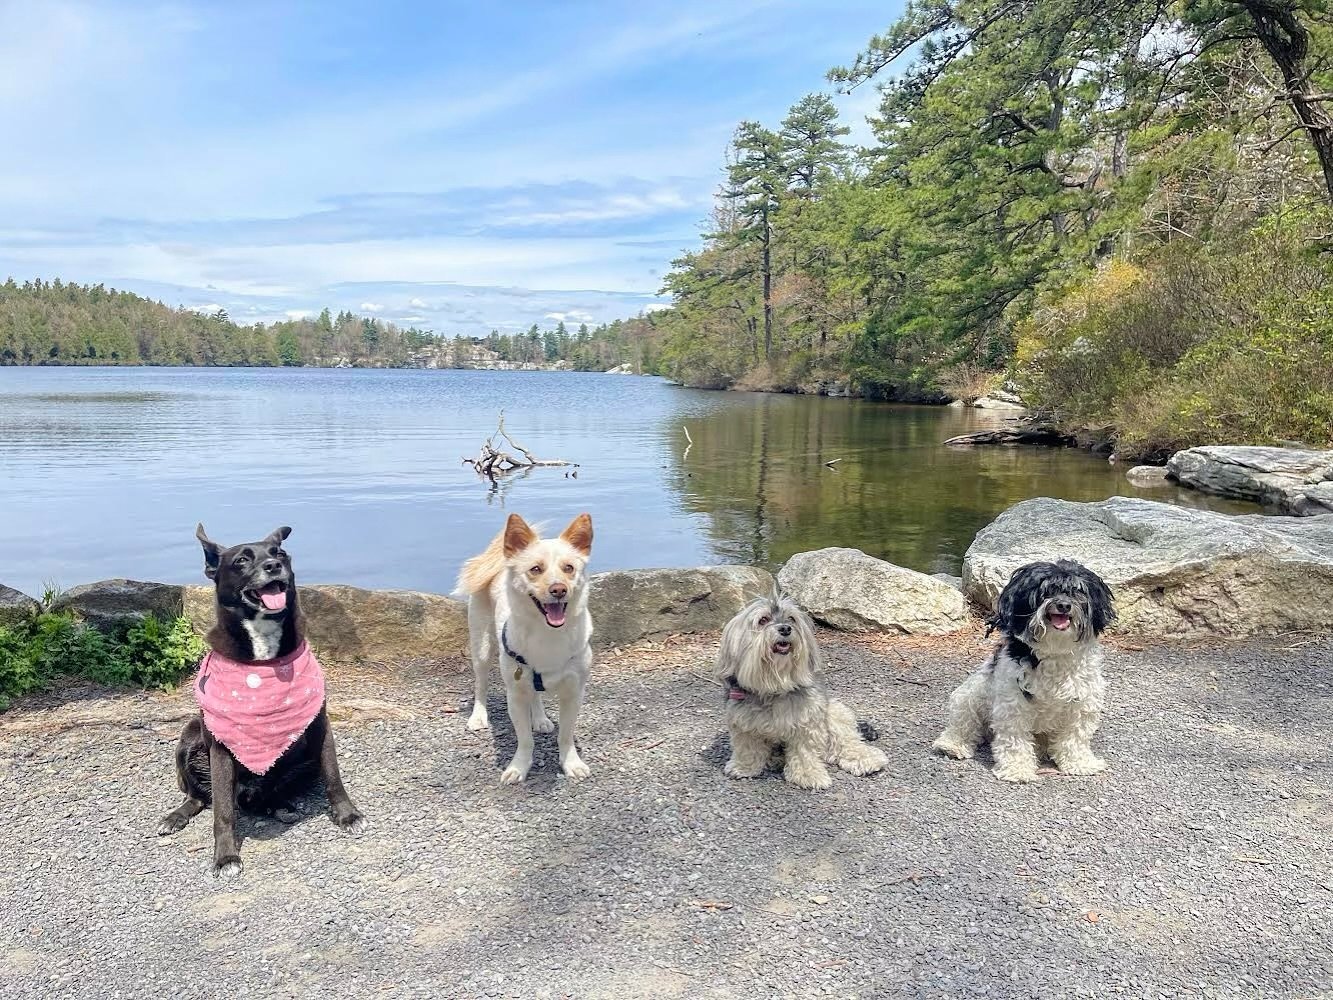 These cousins remind me to get outside and play! Dogs really bring forth my sense of joy and childlike energy. I love these pups so much and cherish our weekend adventures together. 

Take some time to play! It&rsquo;s so important not only for our n